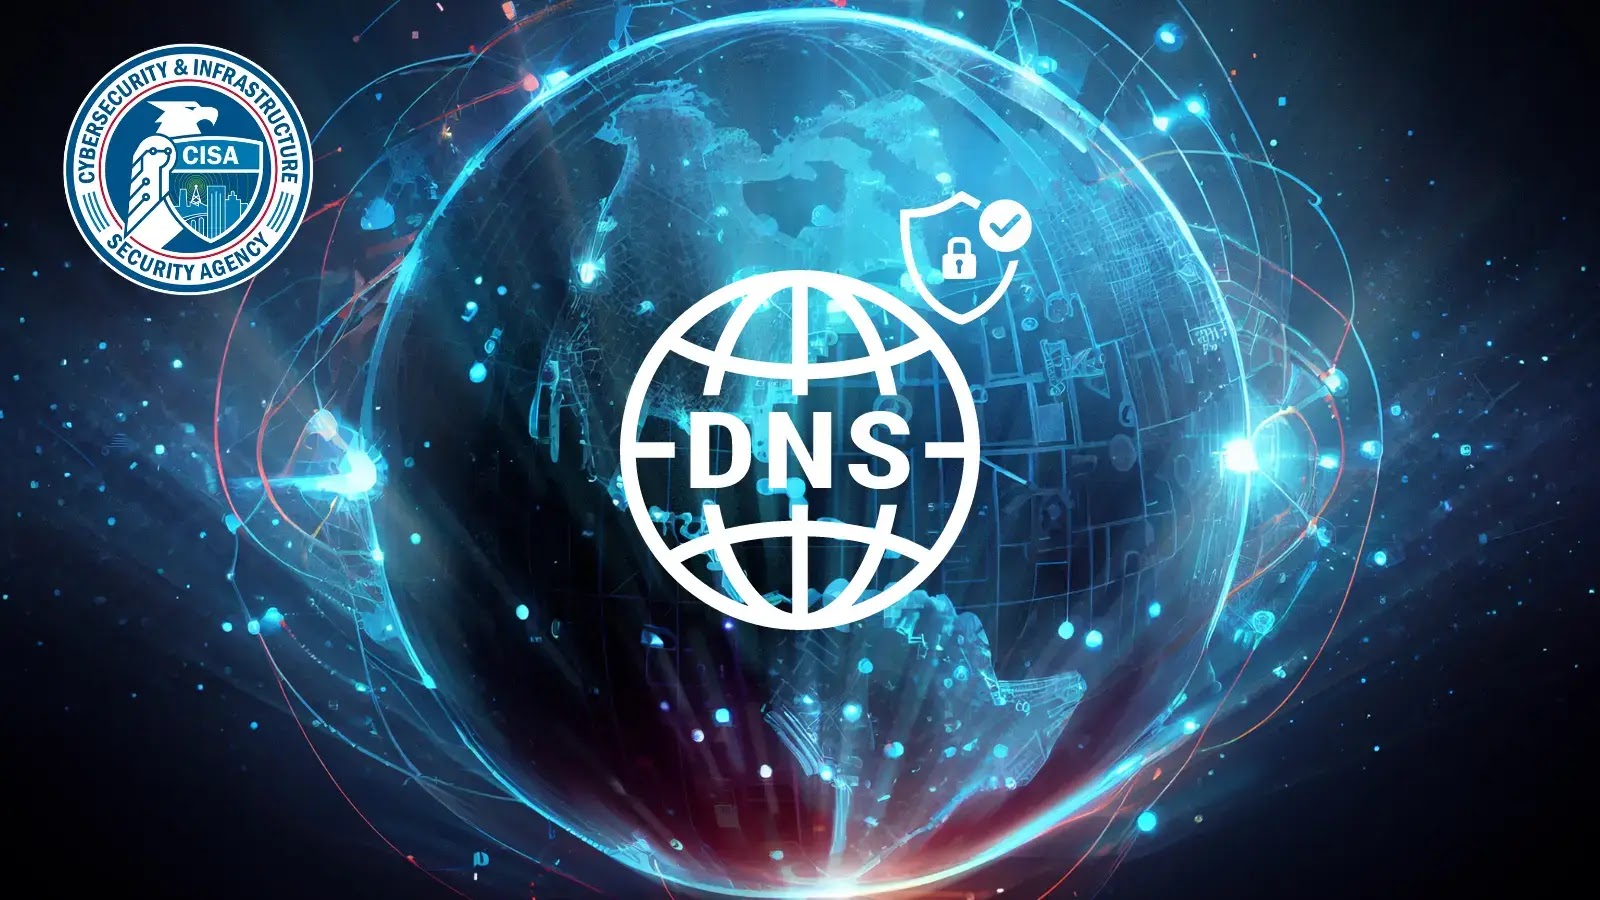 CISA Reveals Guidance For Implementation of Encrypted DNS Protocols